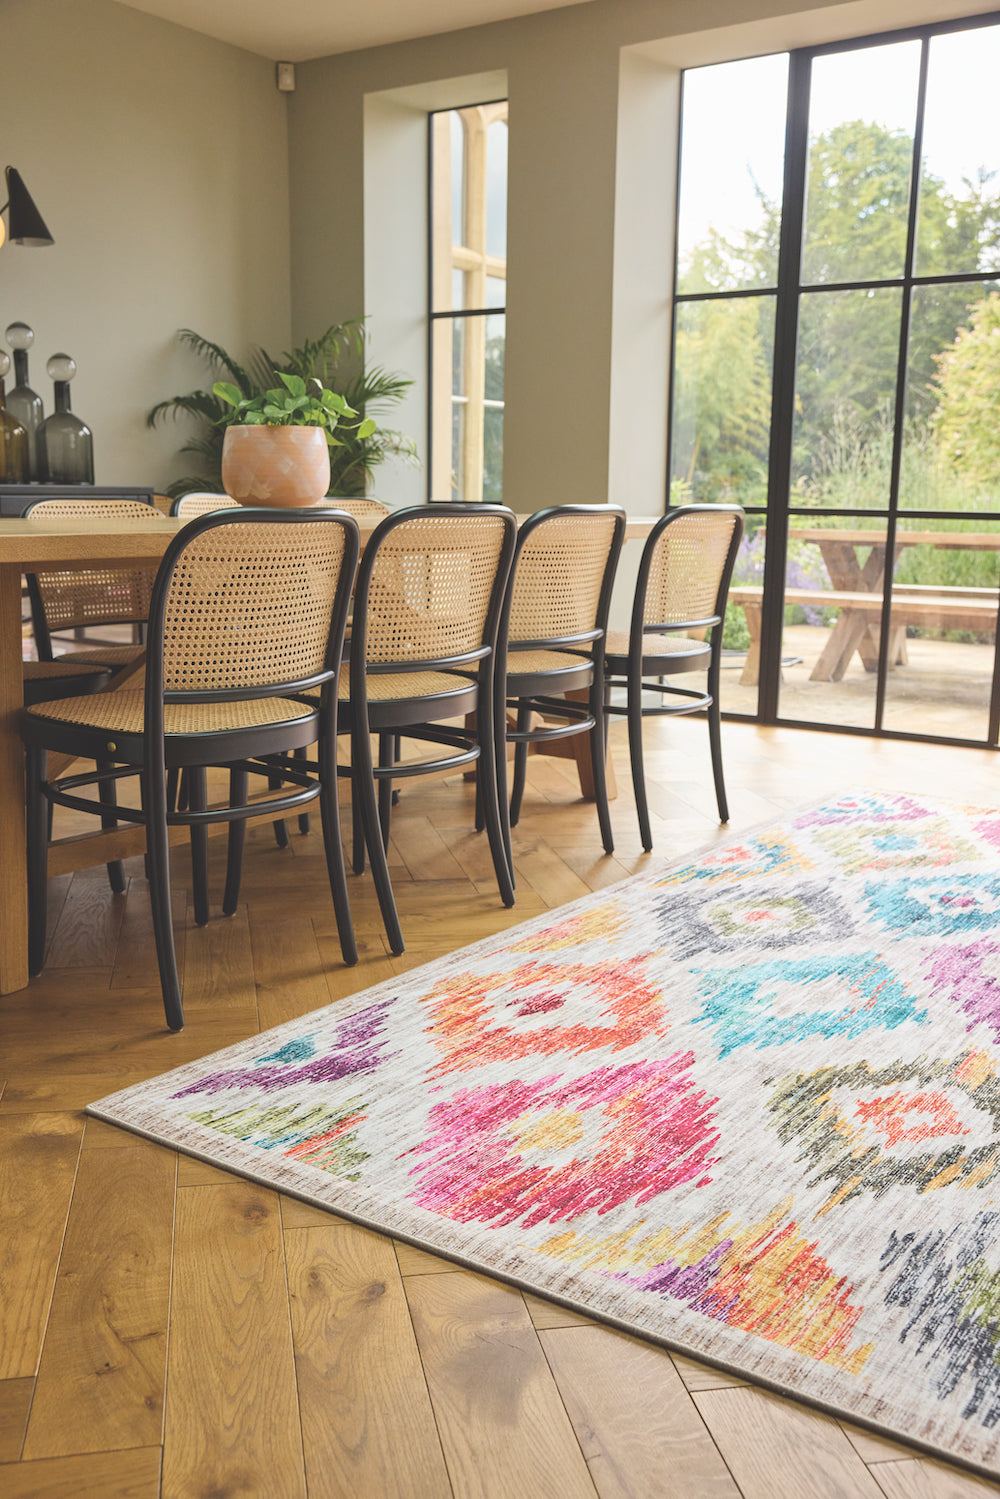 Painted Ikat Washable Rug in a sunny dining room placed on a wooden floor